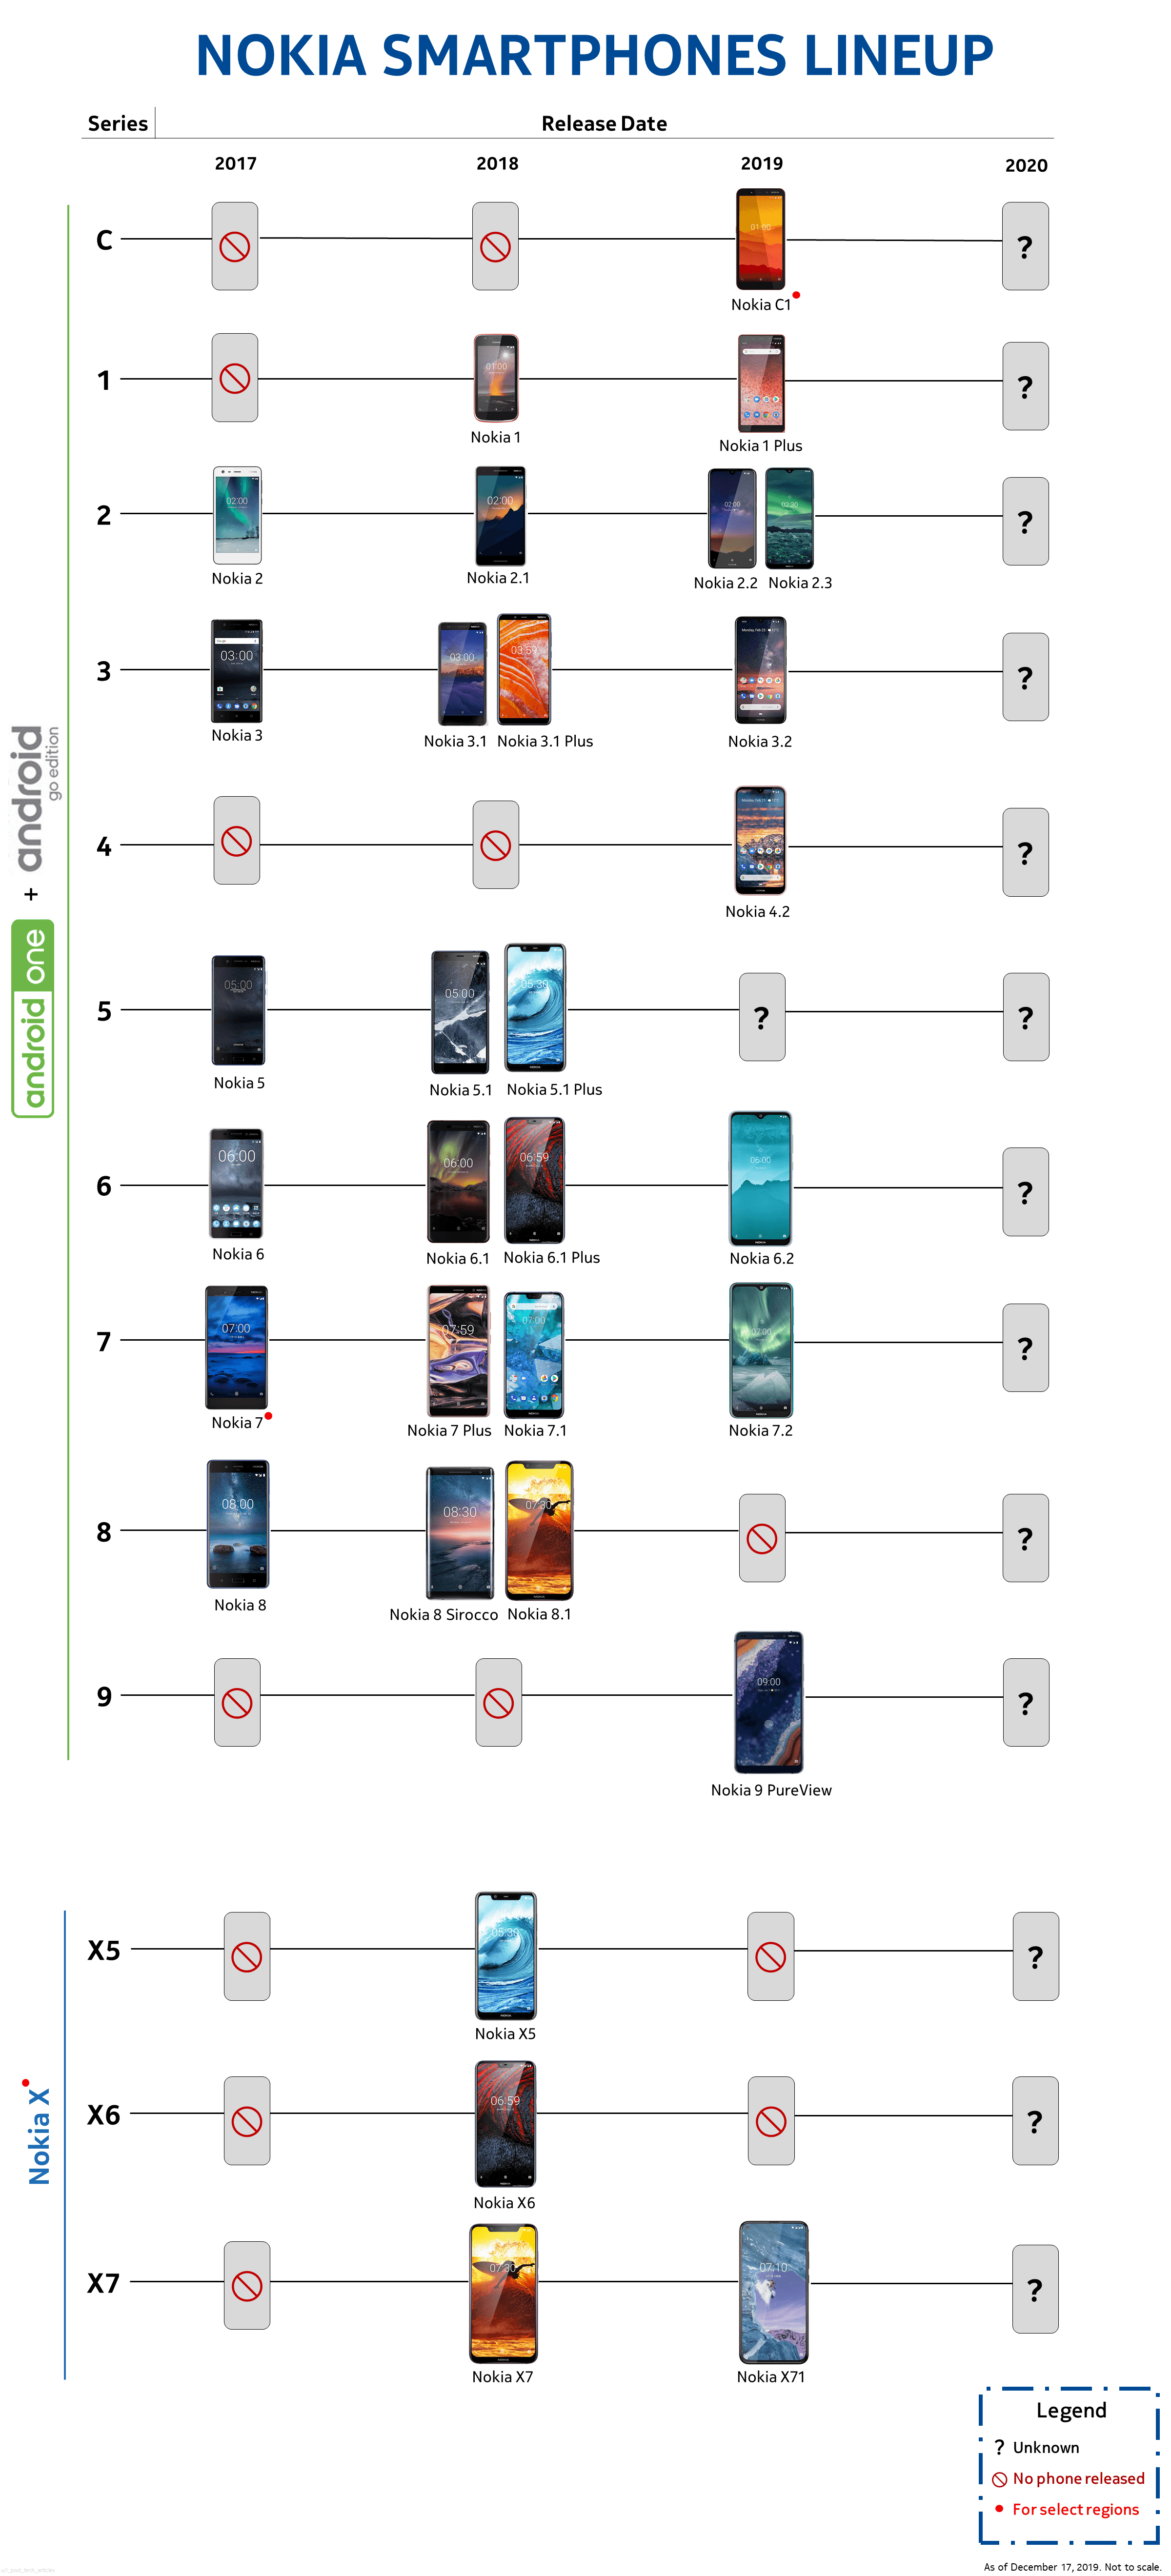 Check the updated timelines of all Nokia smartphones released so far